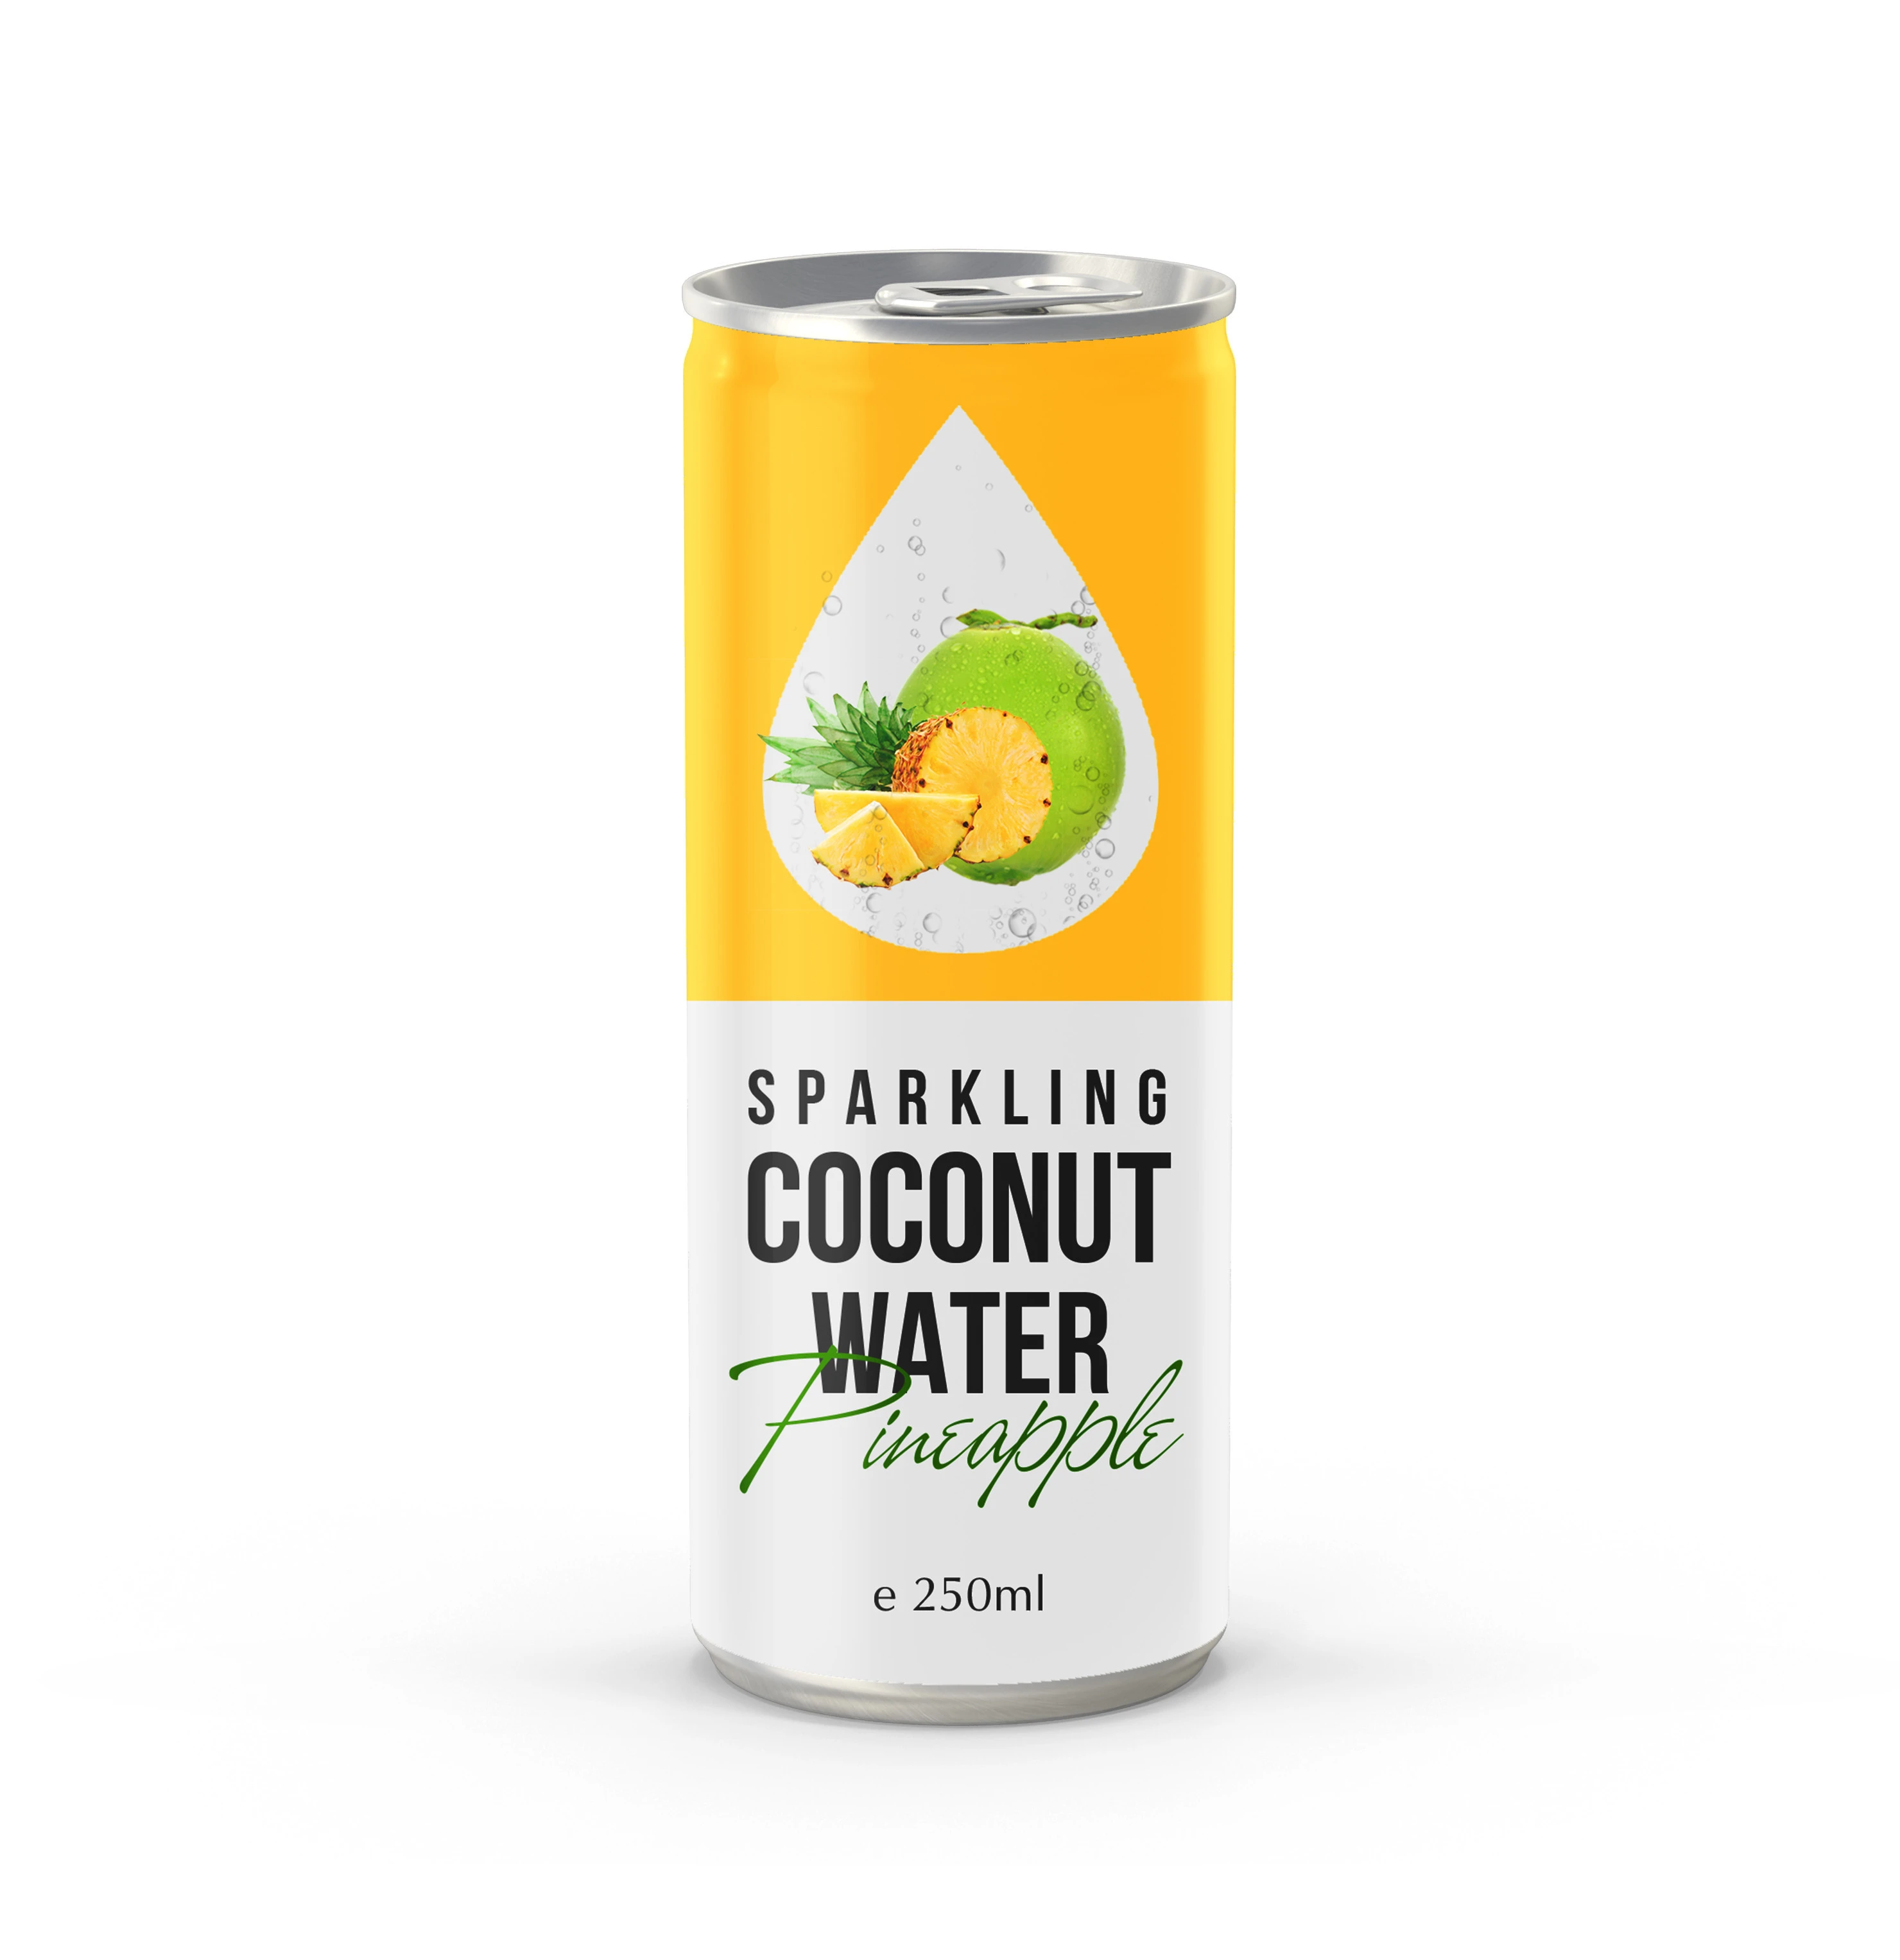 Bulk Coconut Water with Sparkling Type Drink and Lychee Flavor in 250ml Aluminum can